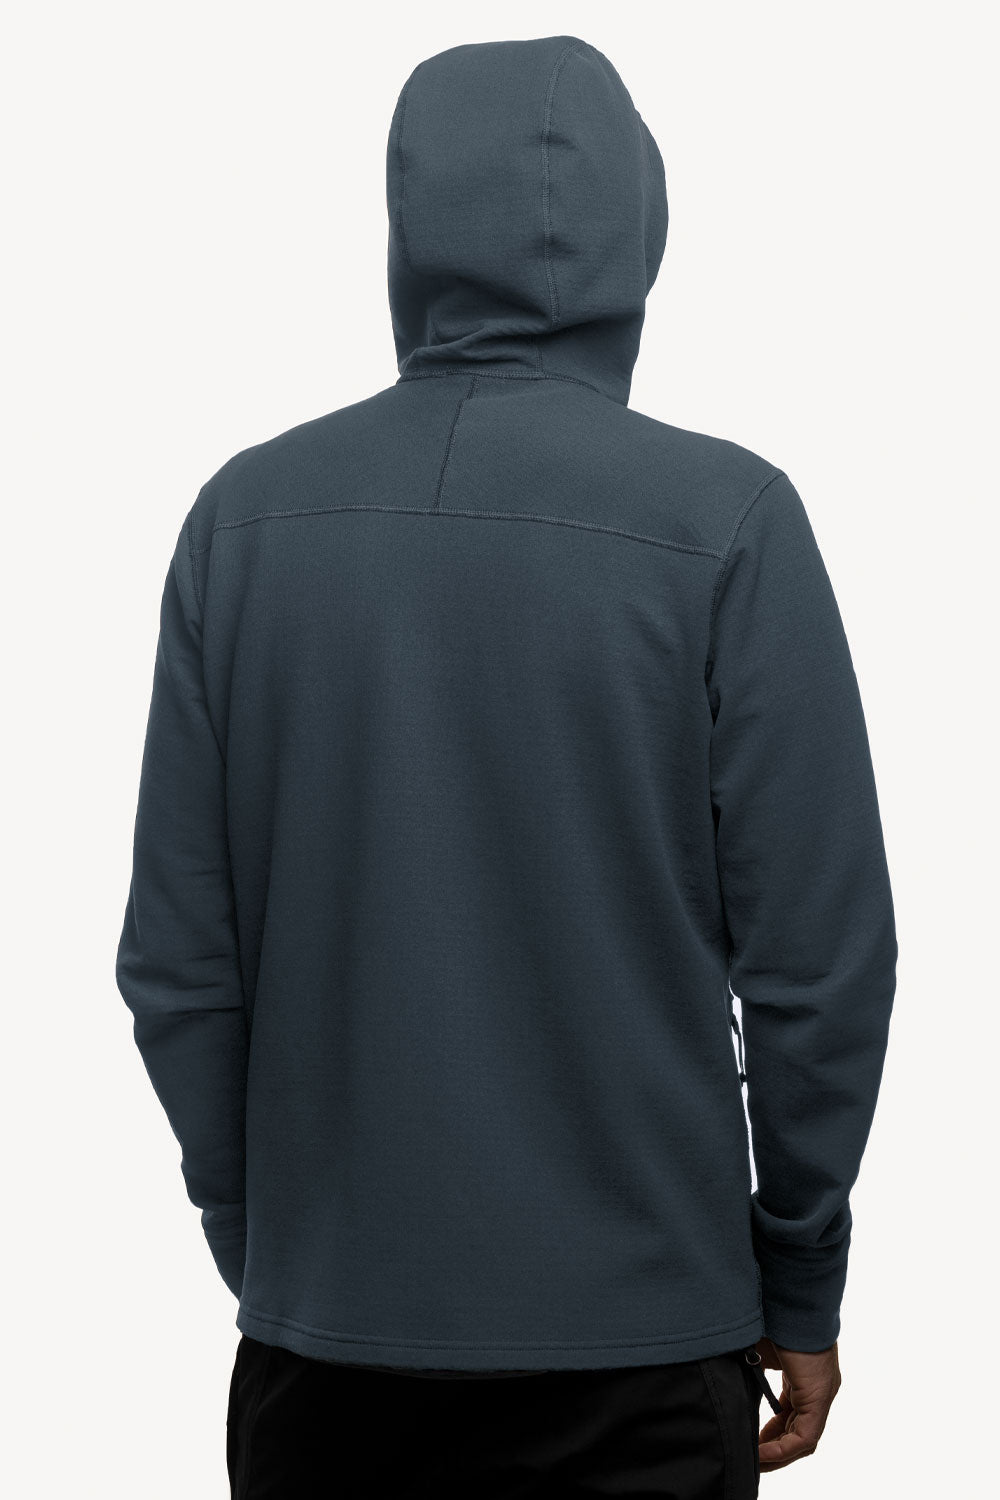 All weather technical hoodie, herr.